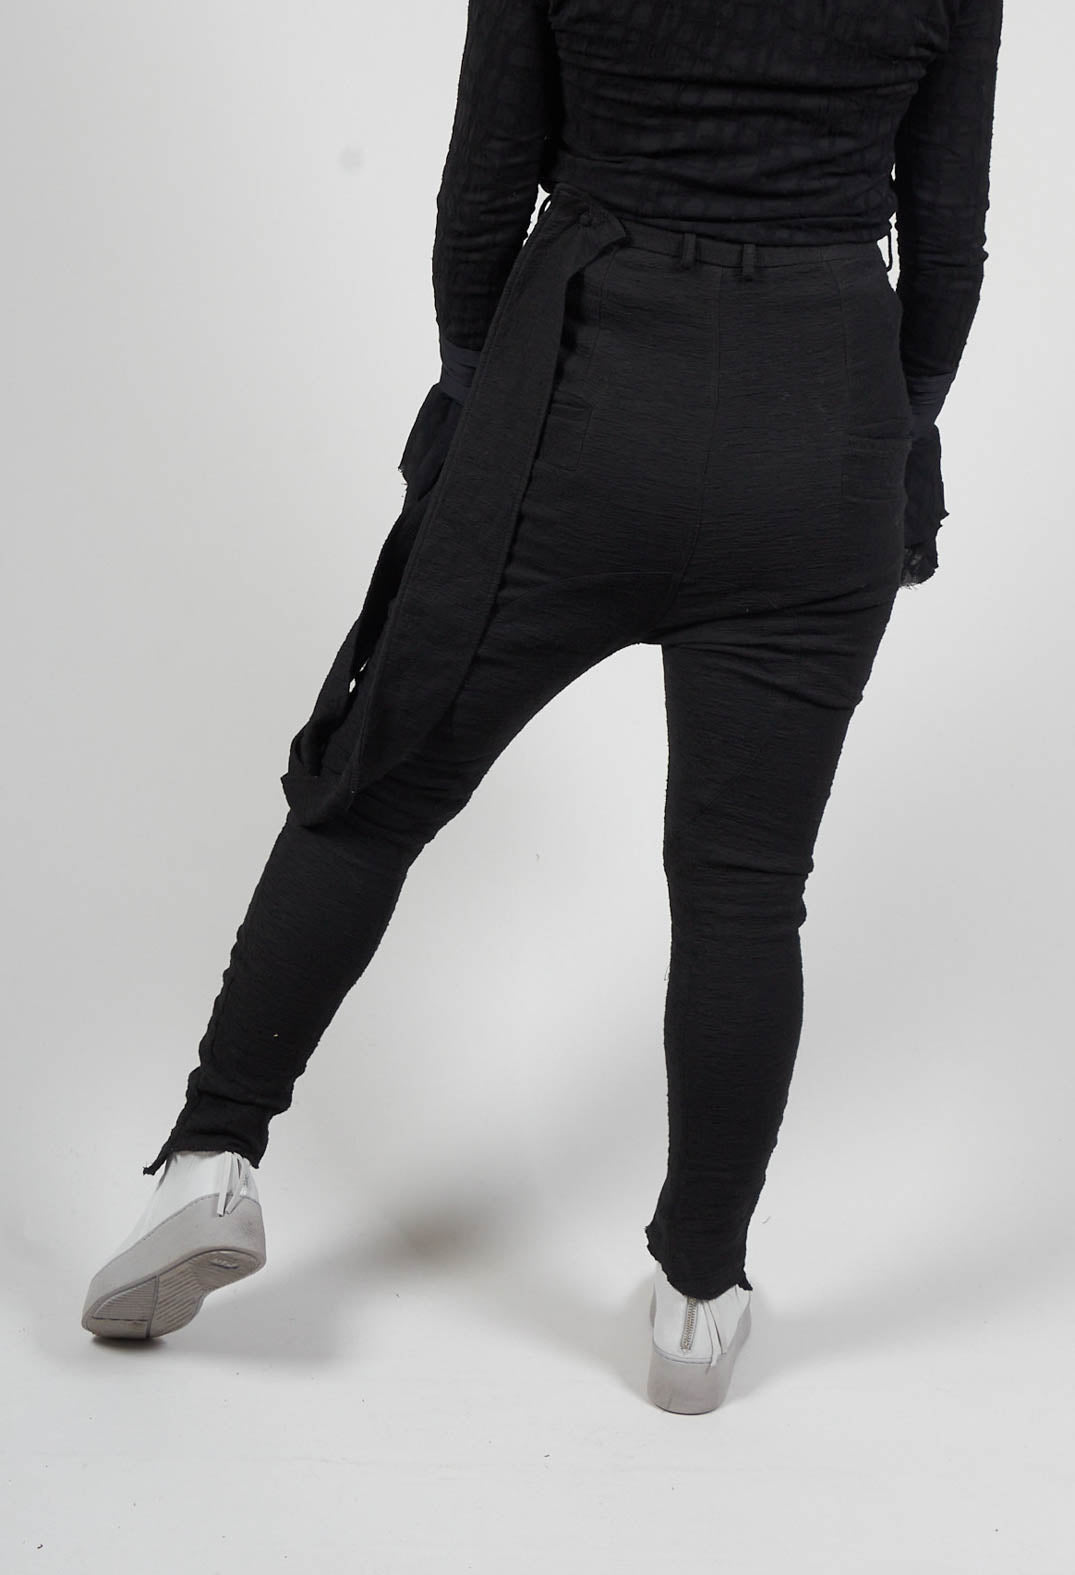 Tjuana Trousers with Suspenders in Black